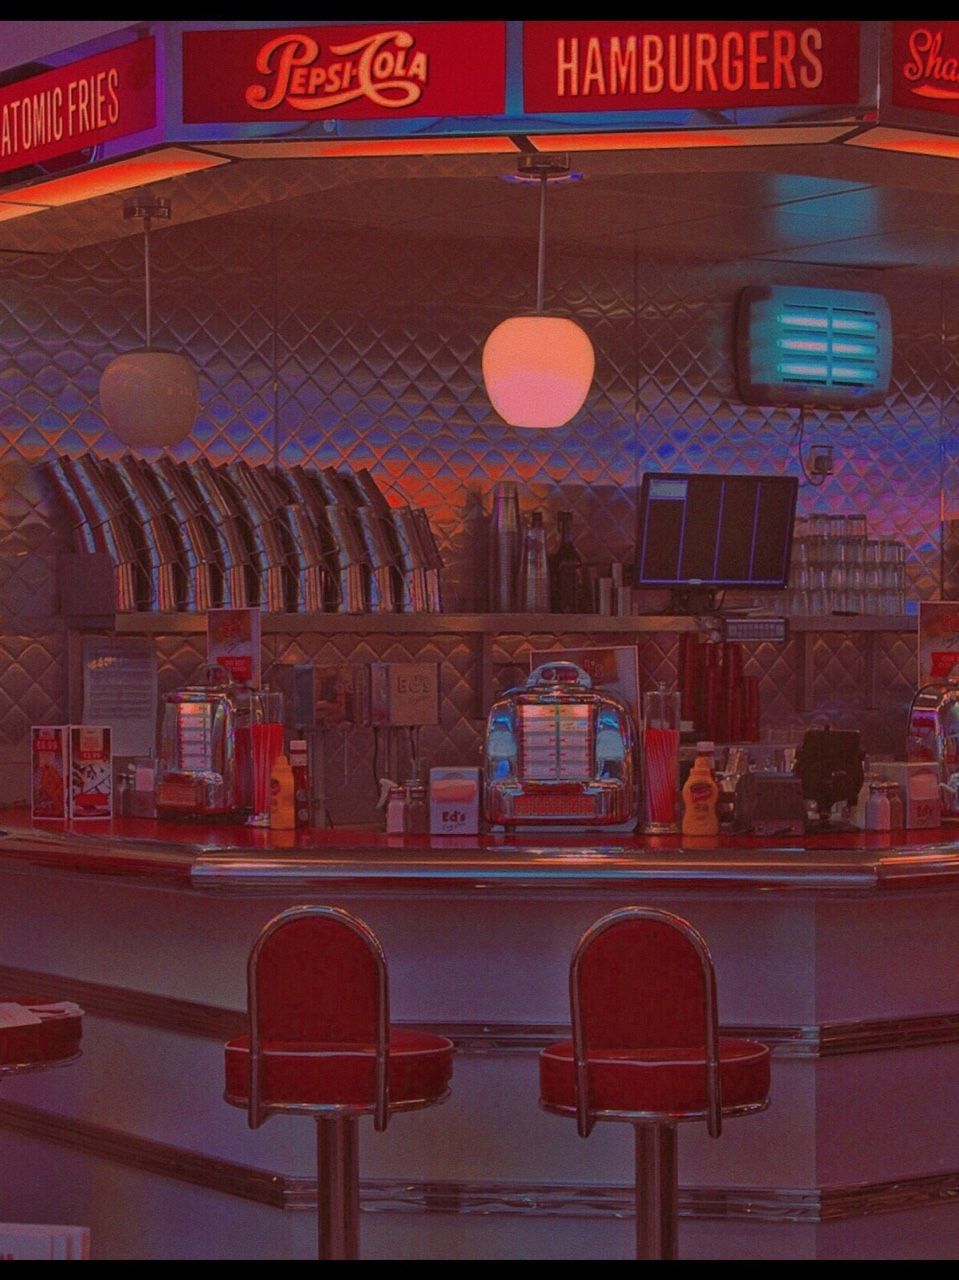 do you want to go there? YES I LOVE DINERS. Diner aesthetic